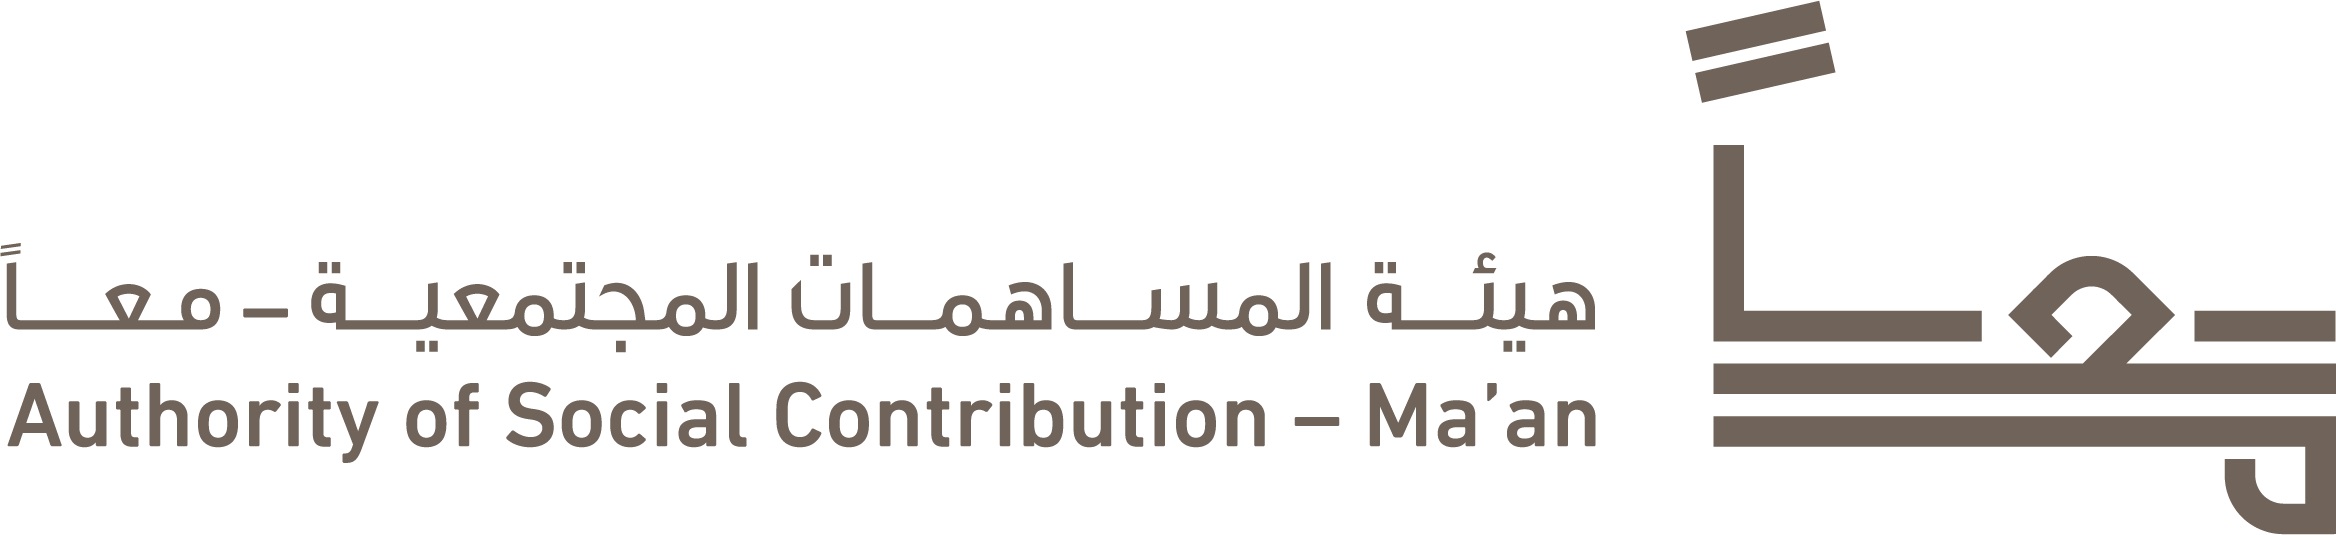 Authority of Social Contribution - Ma'an